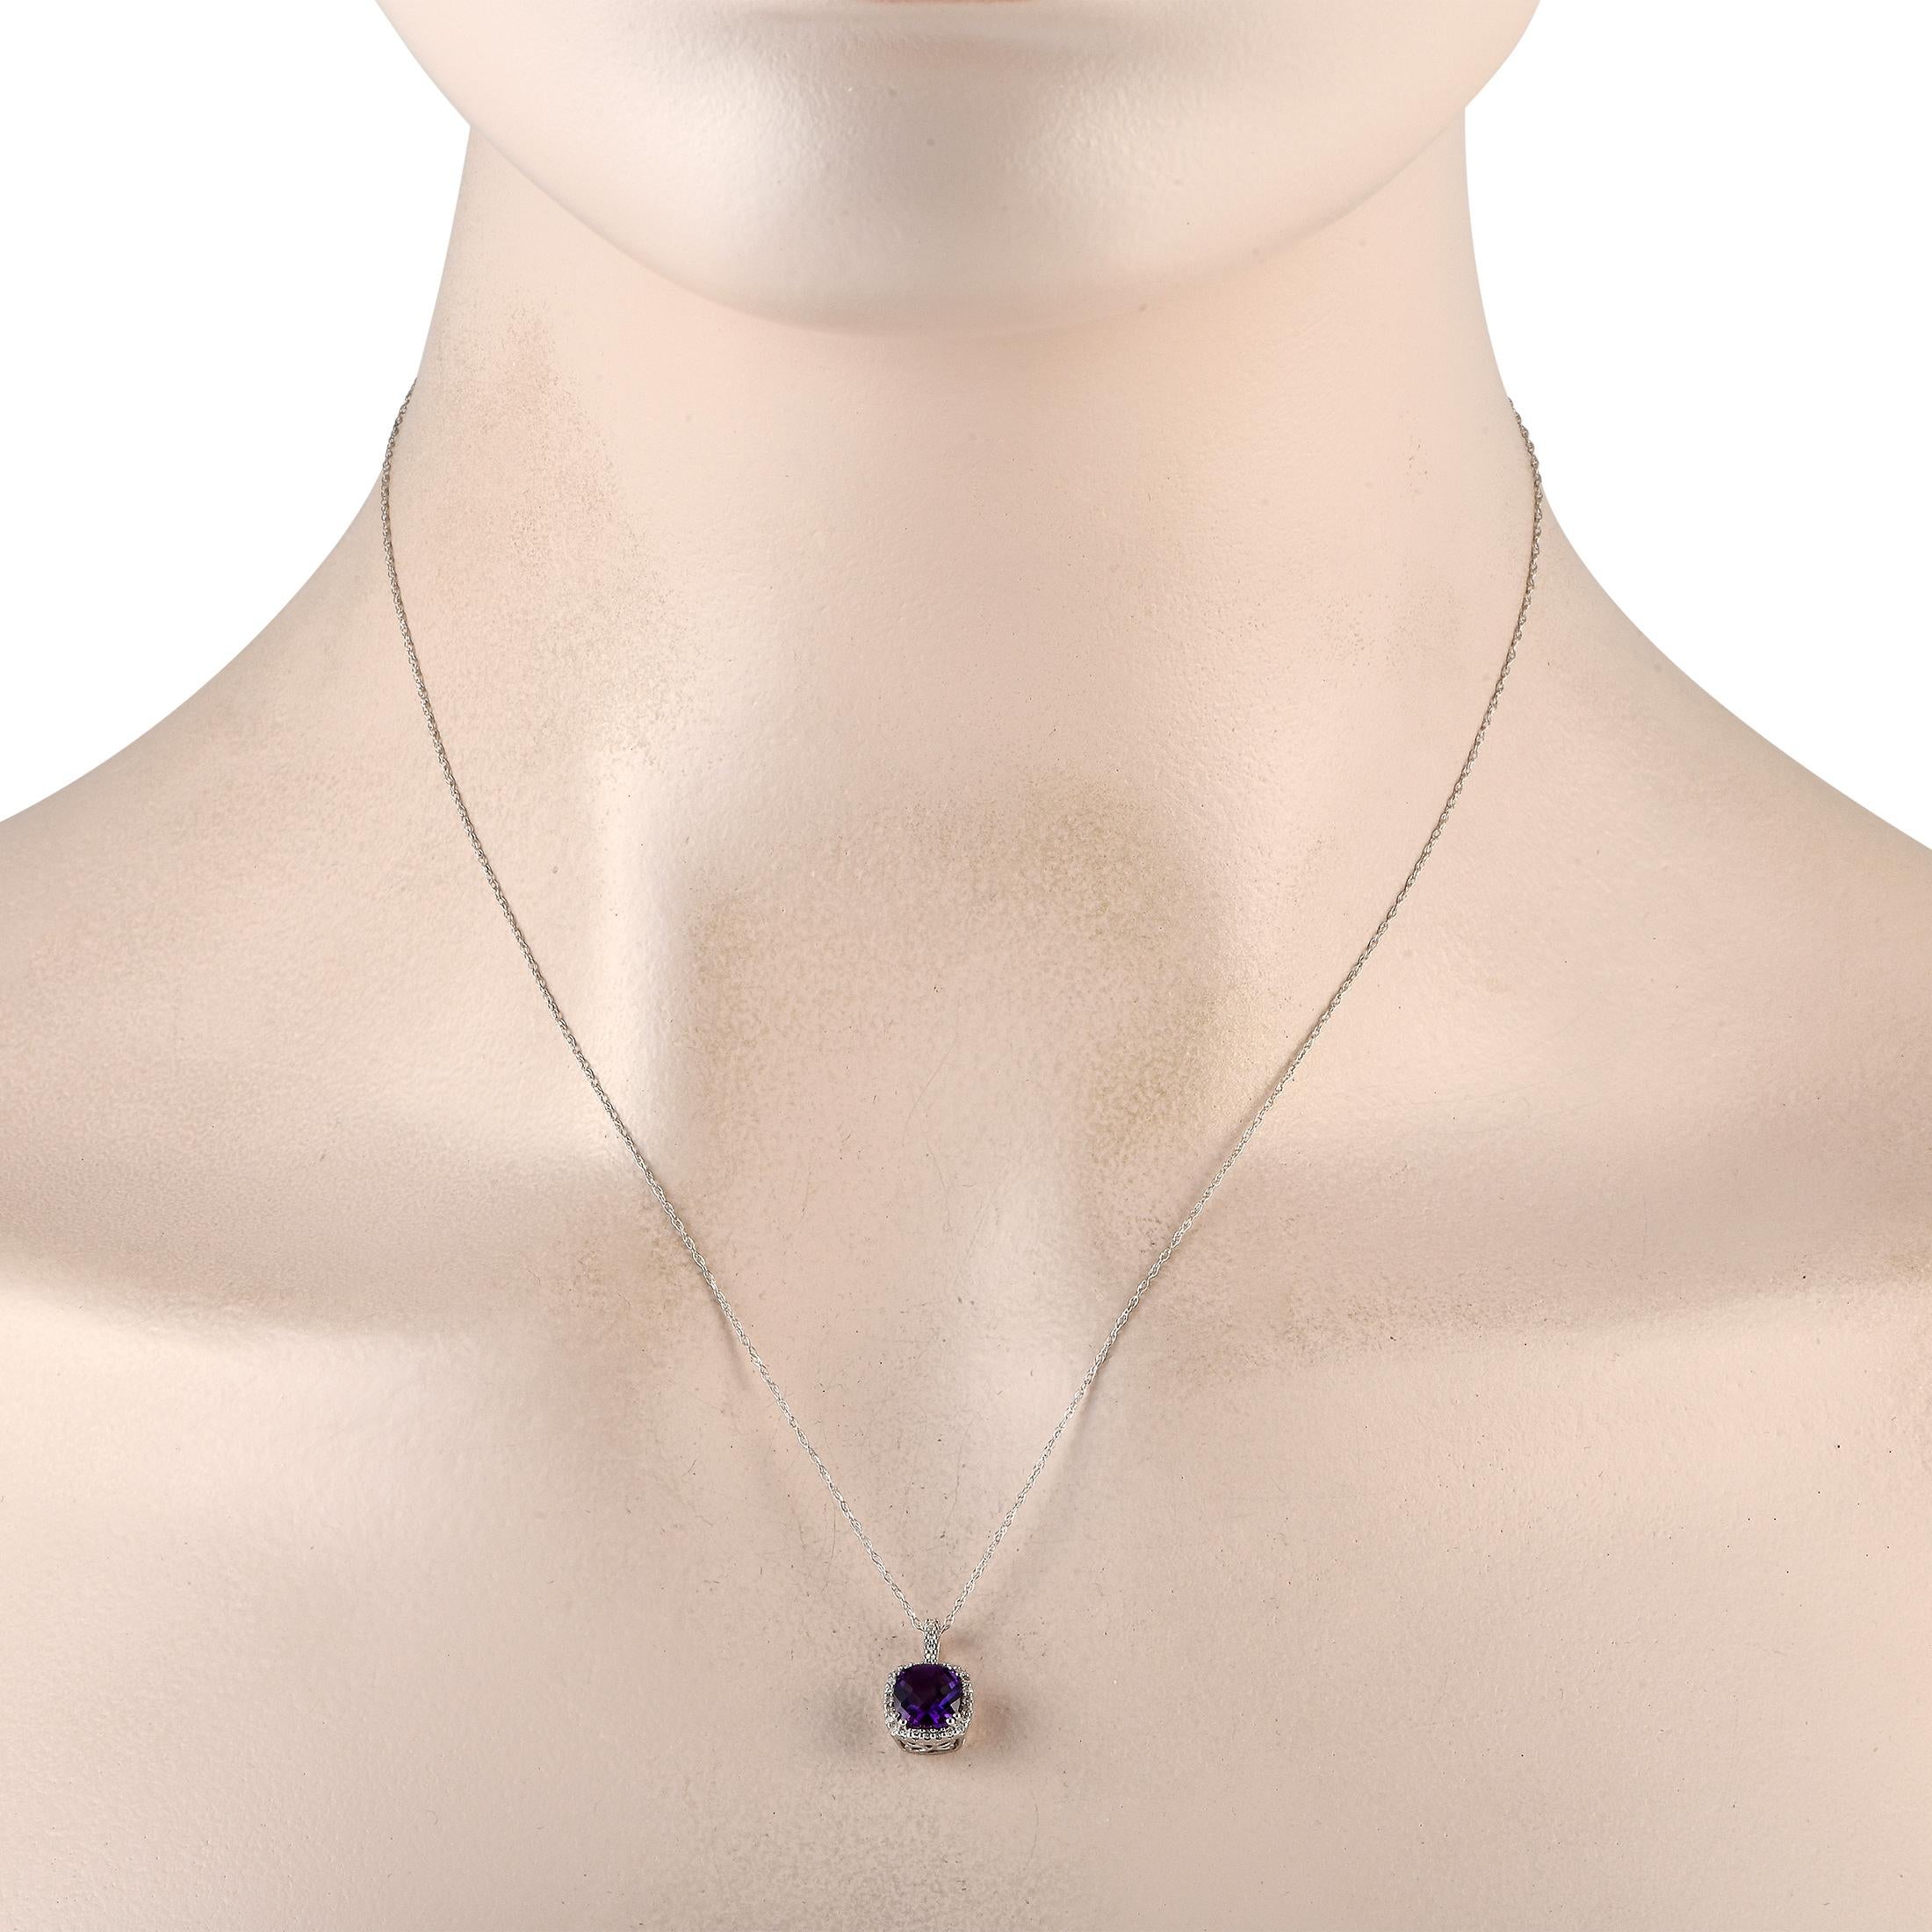 This sleek, sophisticated necklace is ideal for any occasion. Suspended from an 18 chain, youll find a 14K White Gold pendant measuring 0.50 long by 0.25 wide. It showcases a stunning Amethyst center stone and additional Diamond accents totaling